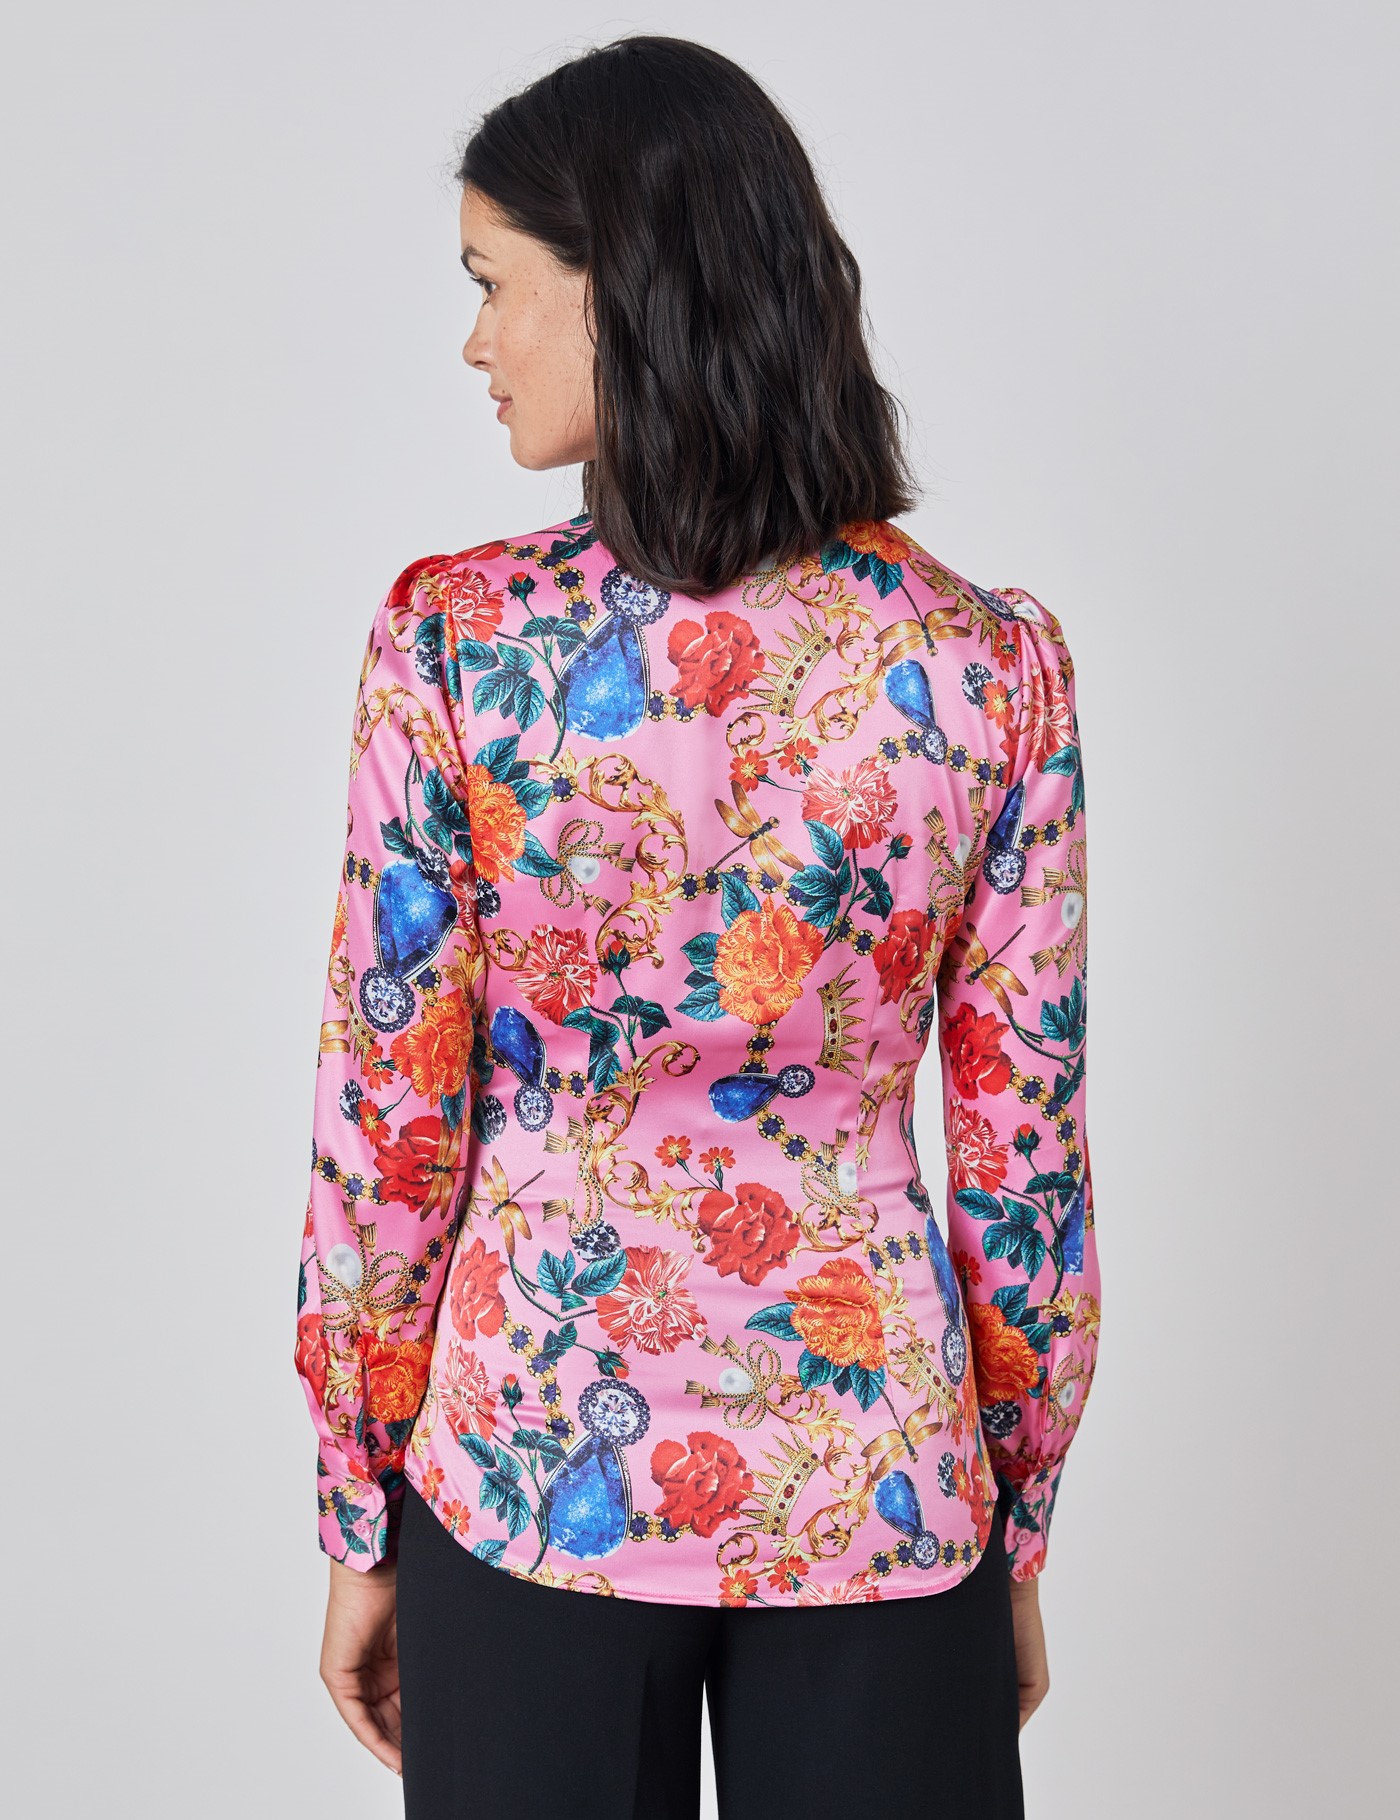 Floral Print Womens Satin Blouse With Single Cuff In Pink And Gold Hawes And Curtis Usa